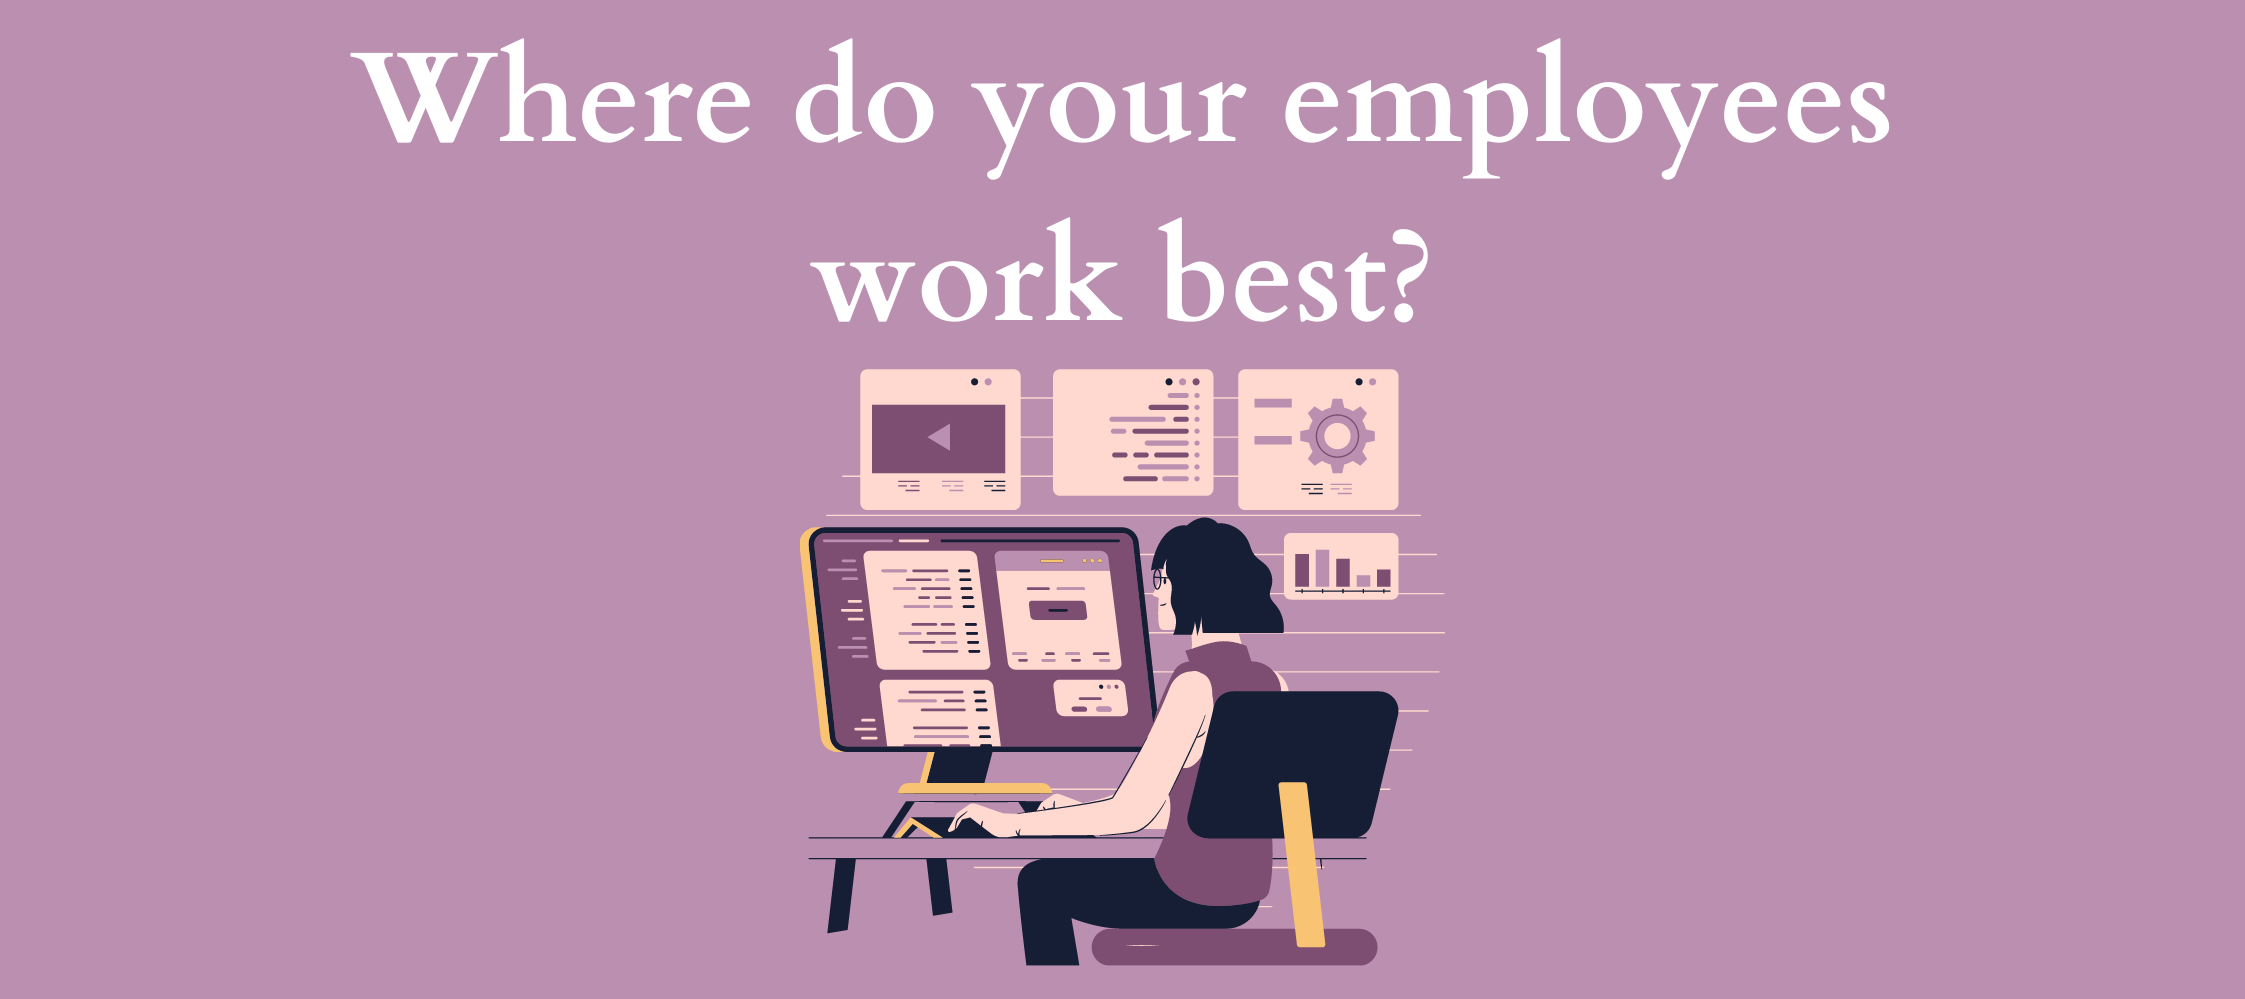 Where do your employees work best?